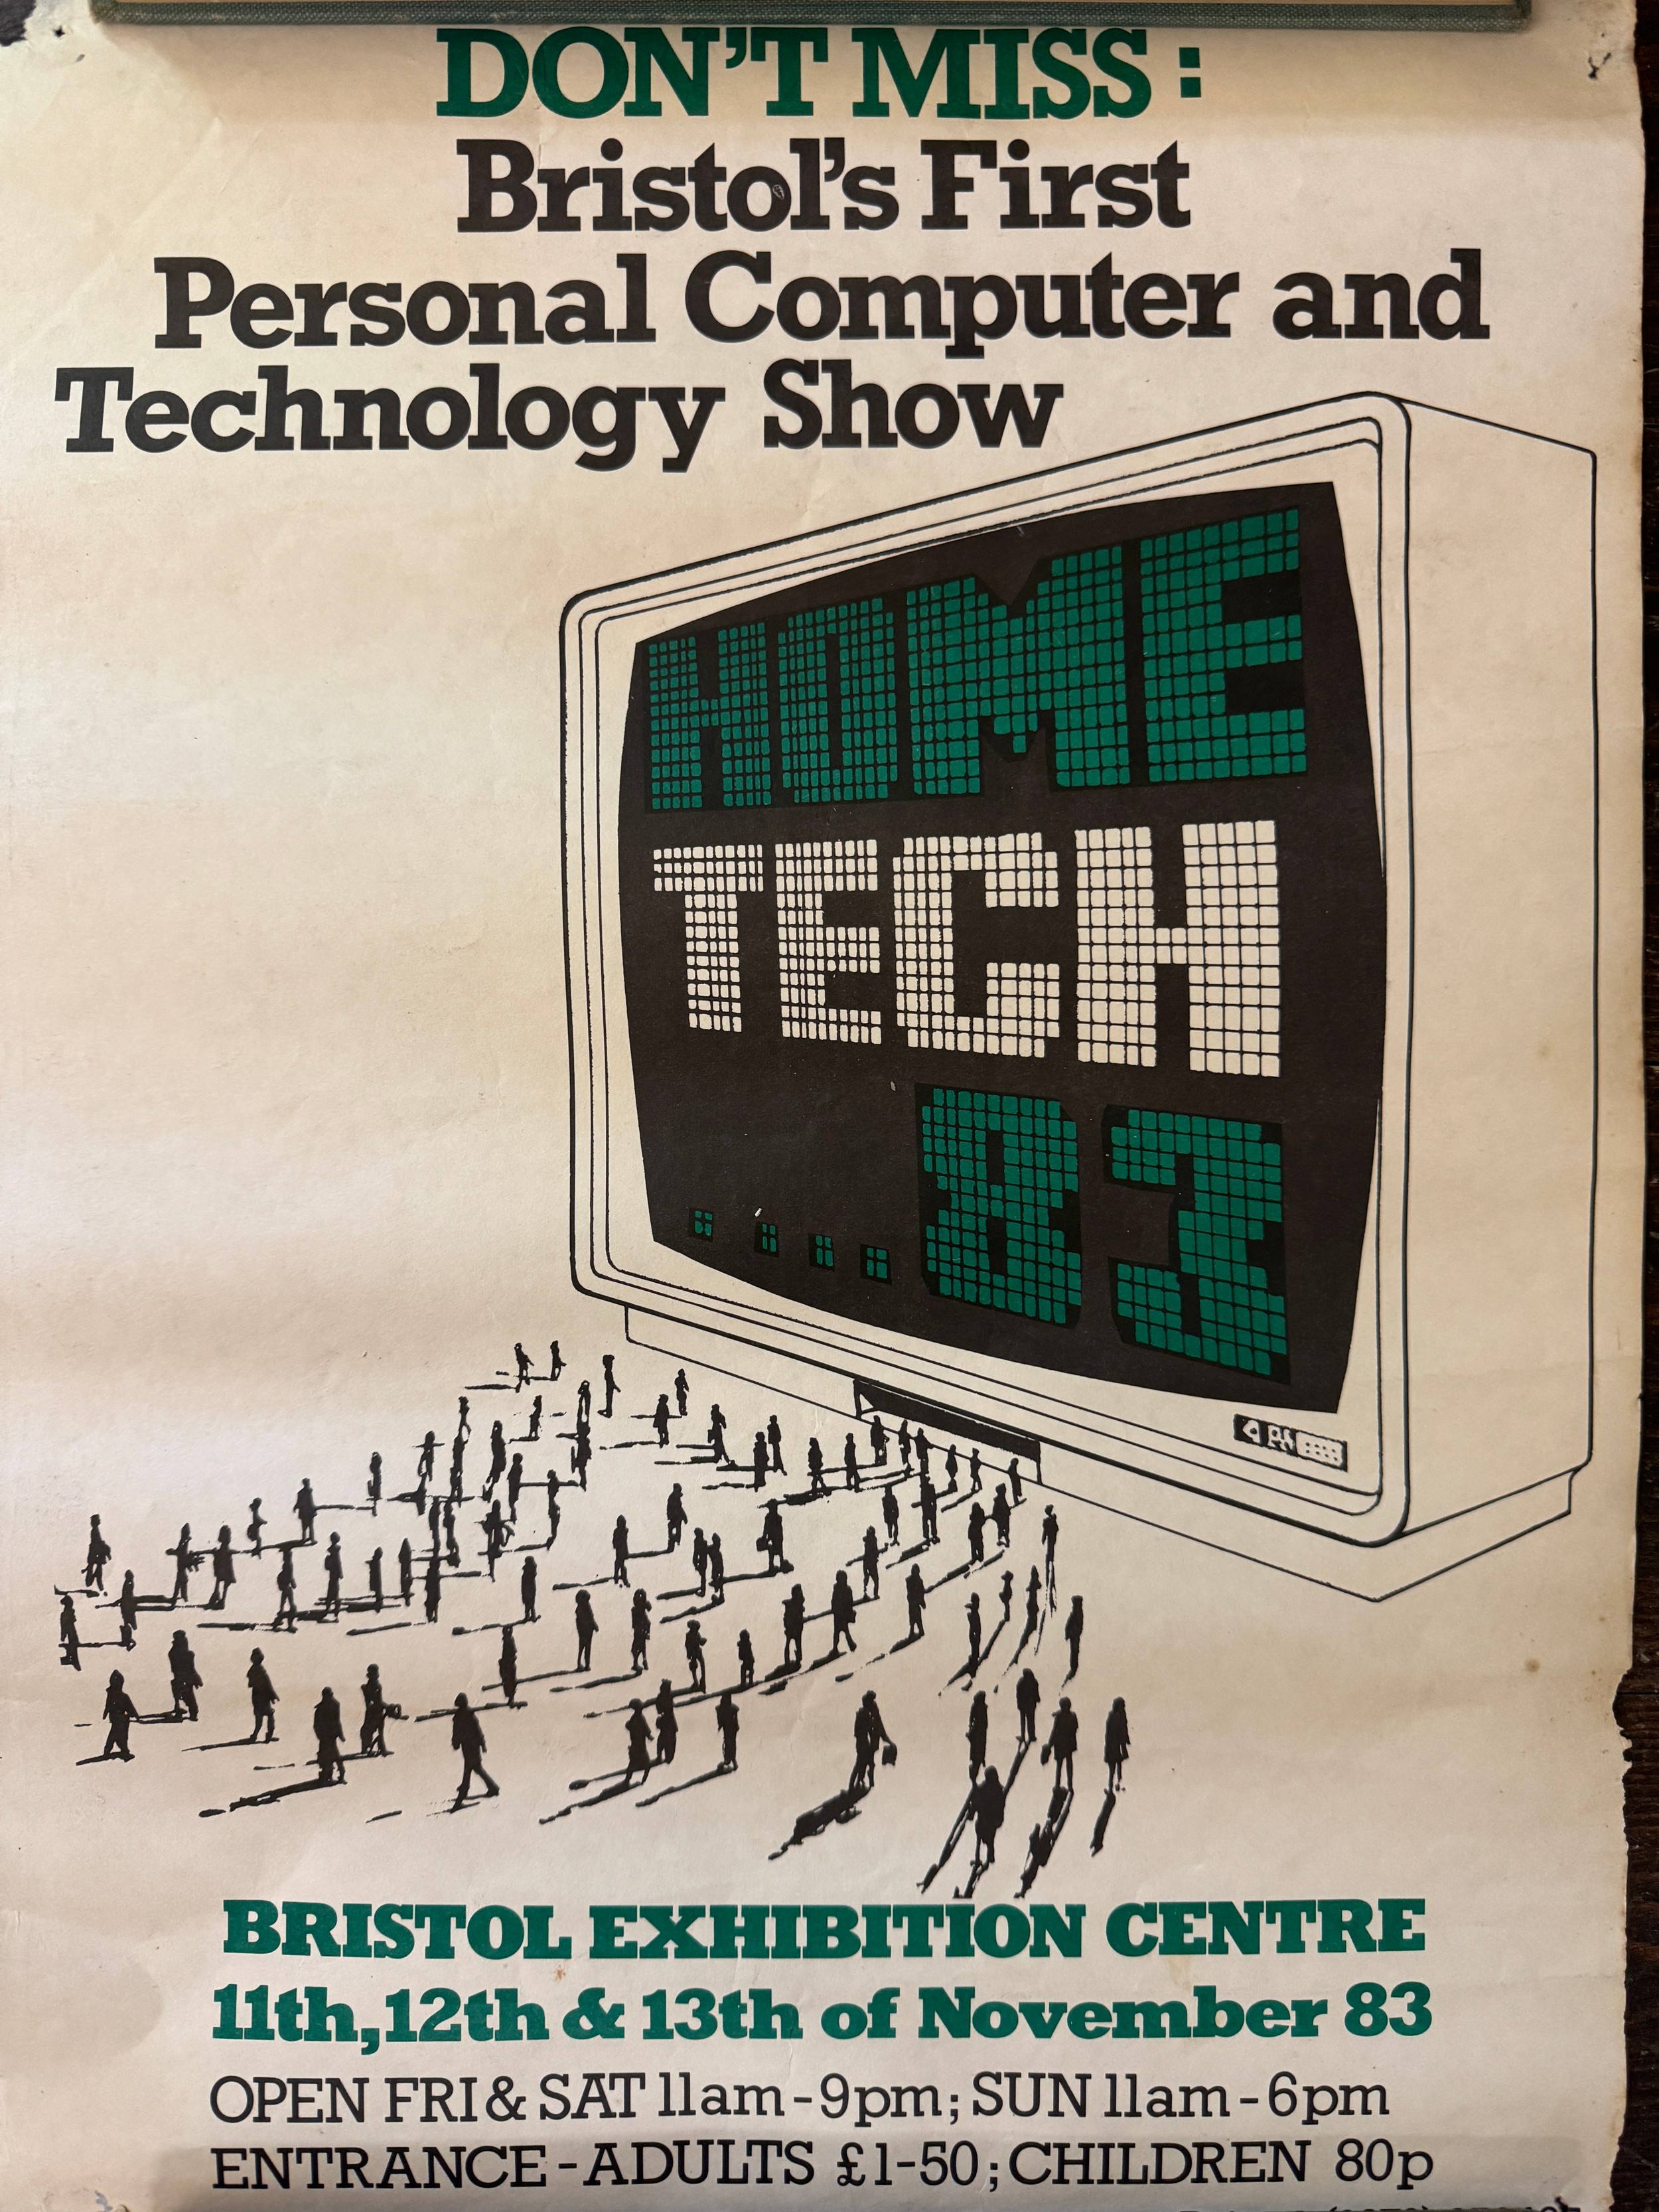 A collection of 1980s posters relating to films, music, computer technology and games and sport, - Image 4 of 5